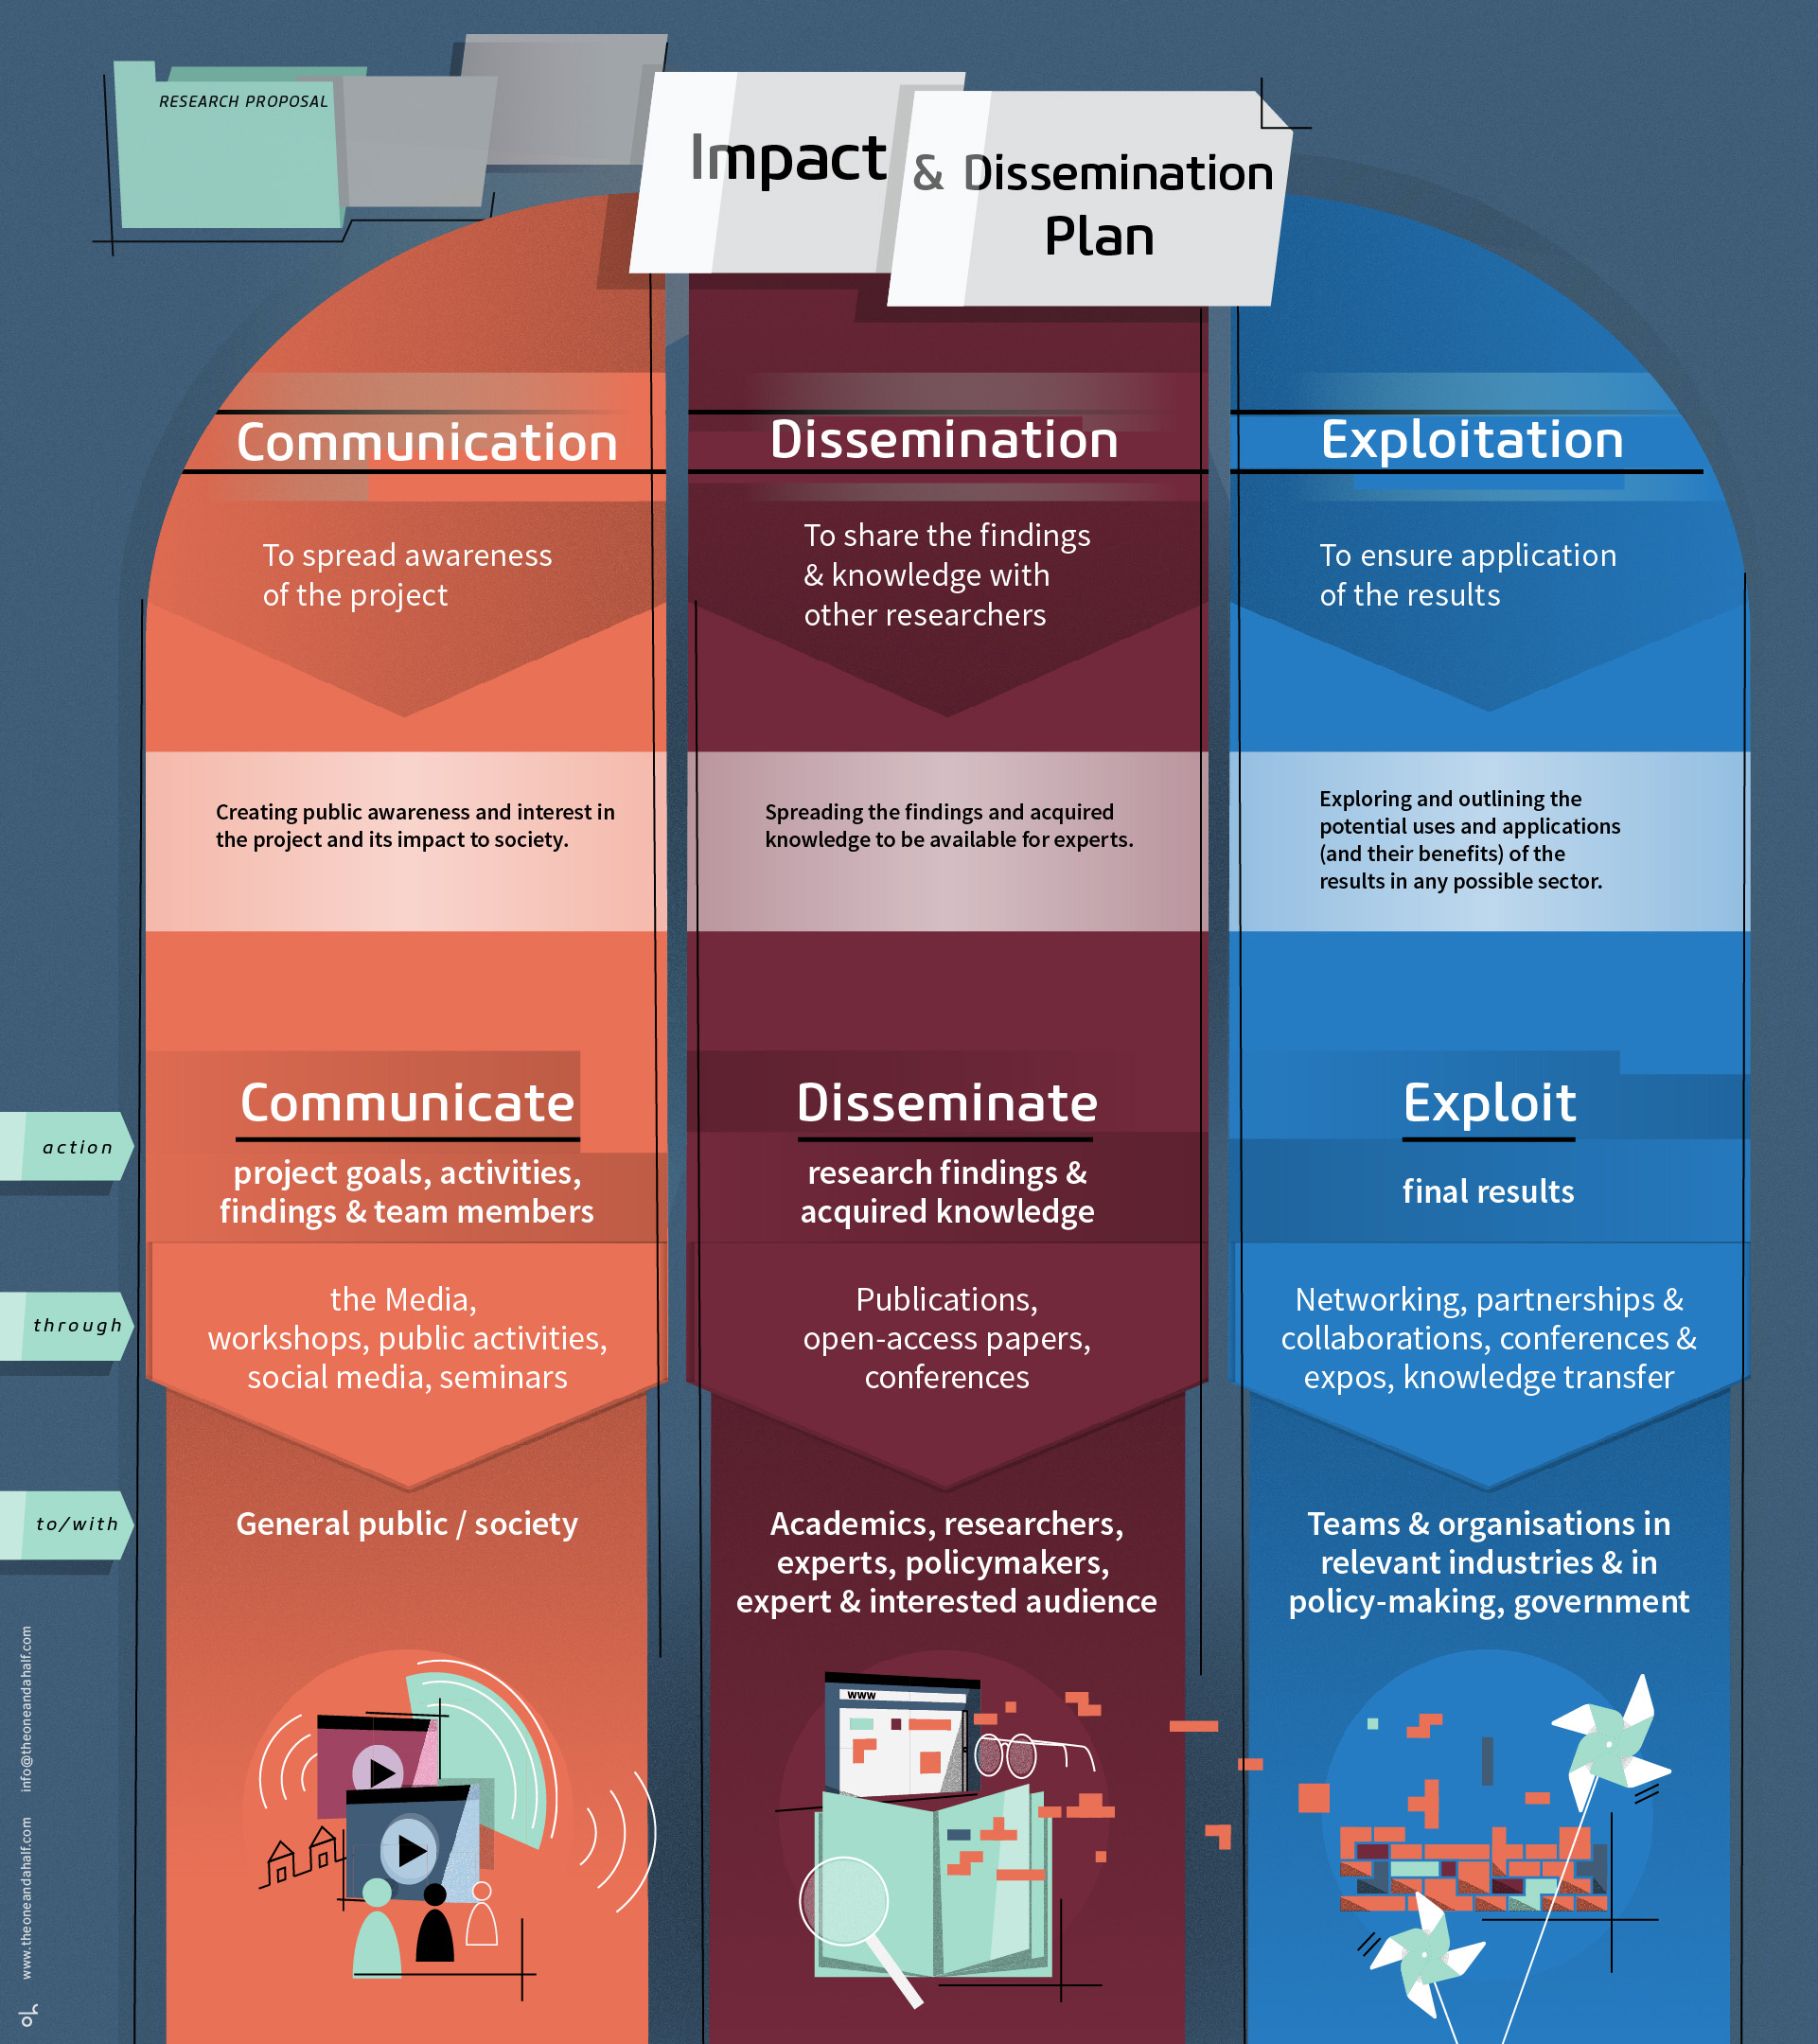 oh_research propsal_dissemination_impact_science_plan_infographic1